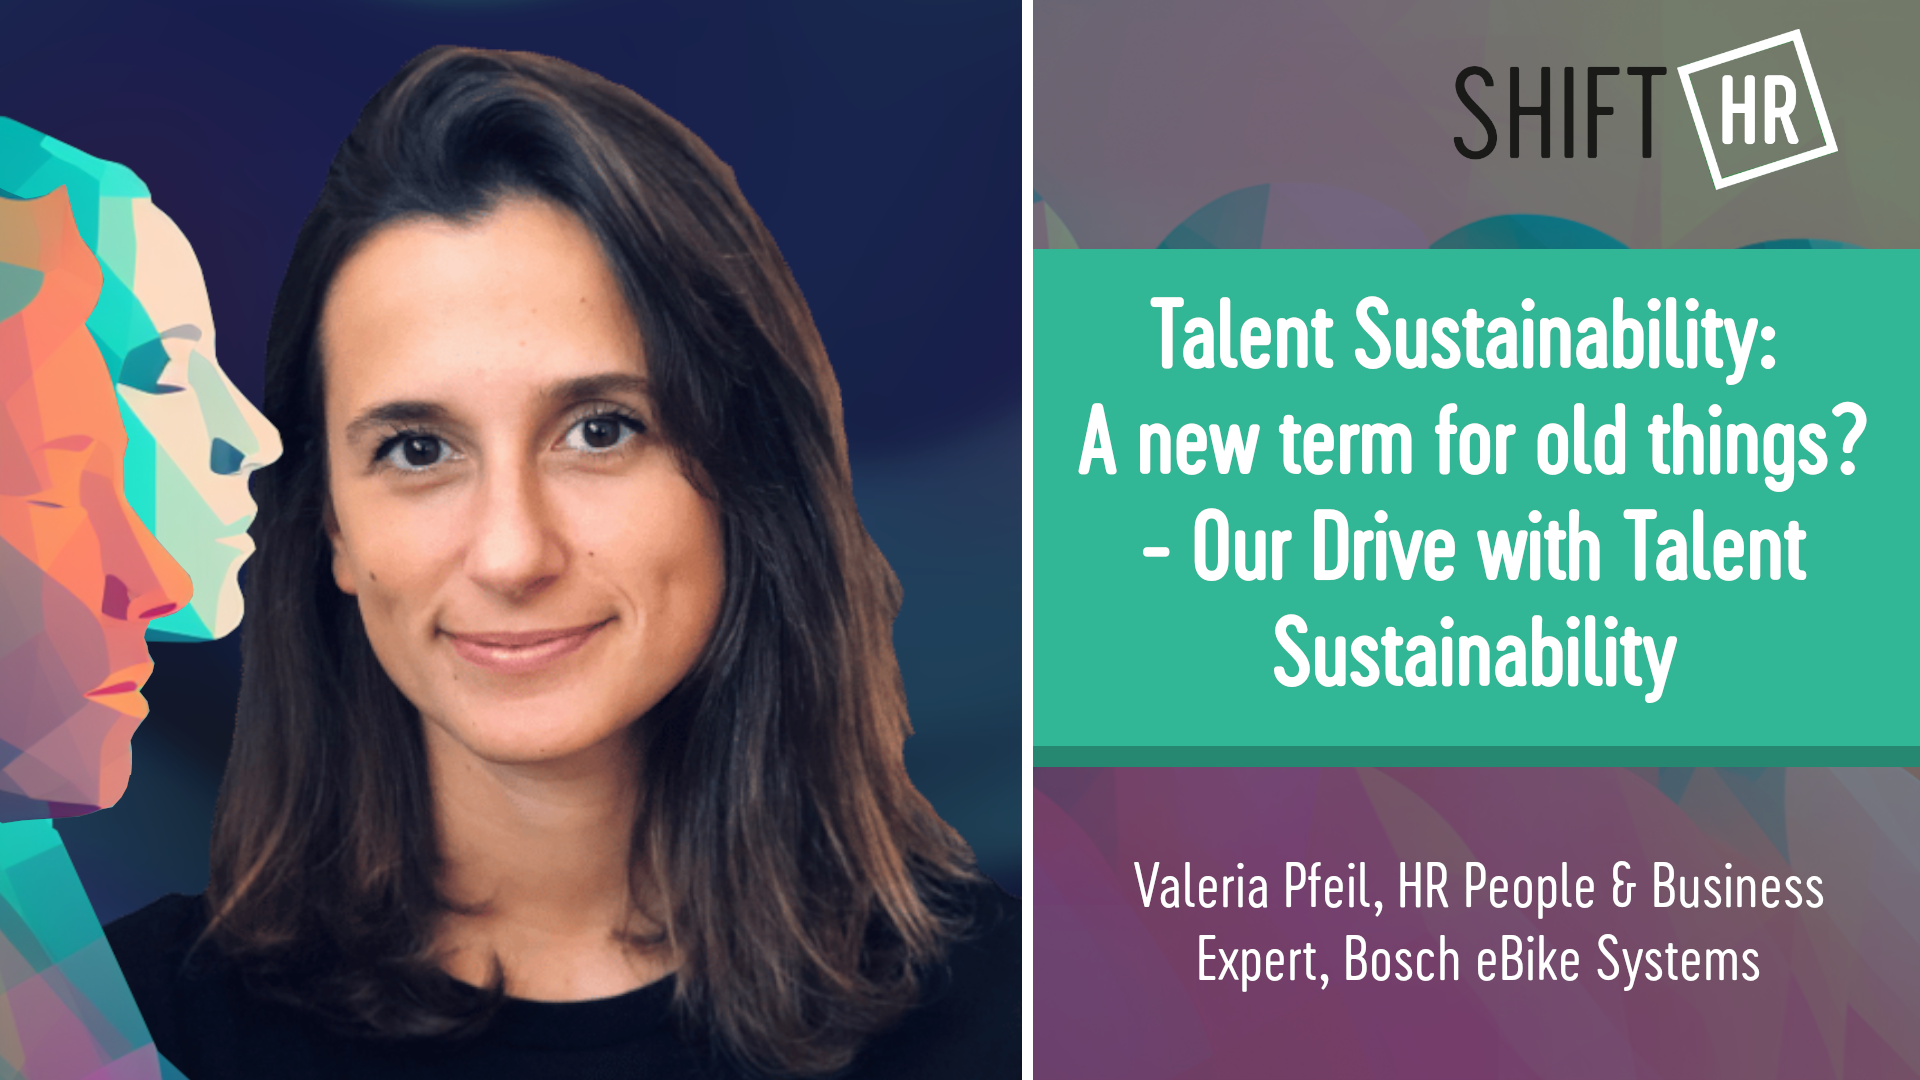 Talent Sustainability: A new term for old things? - Our Drive with Talent Sustainability